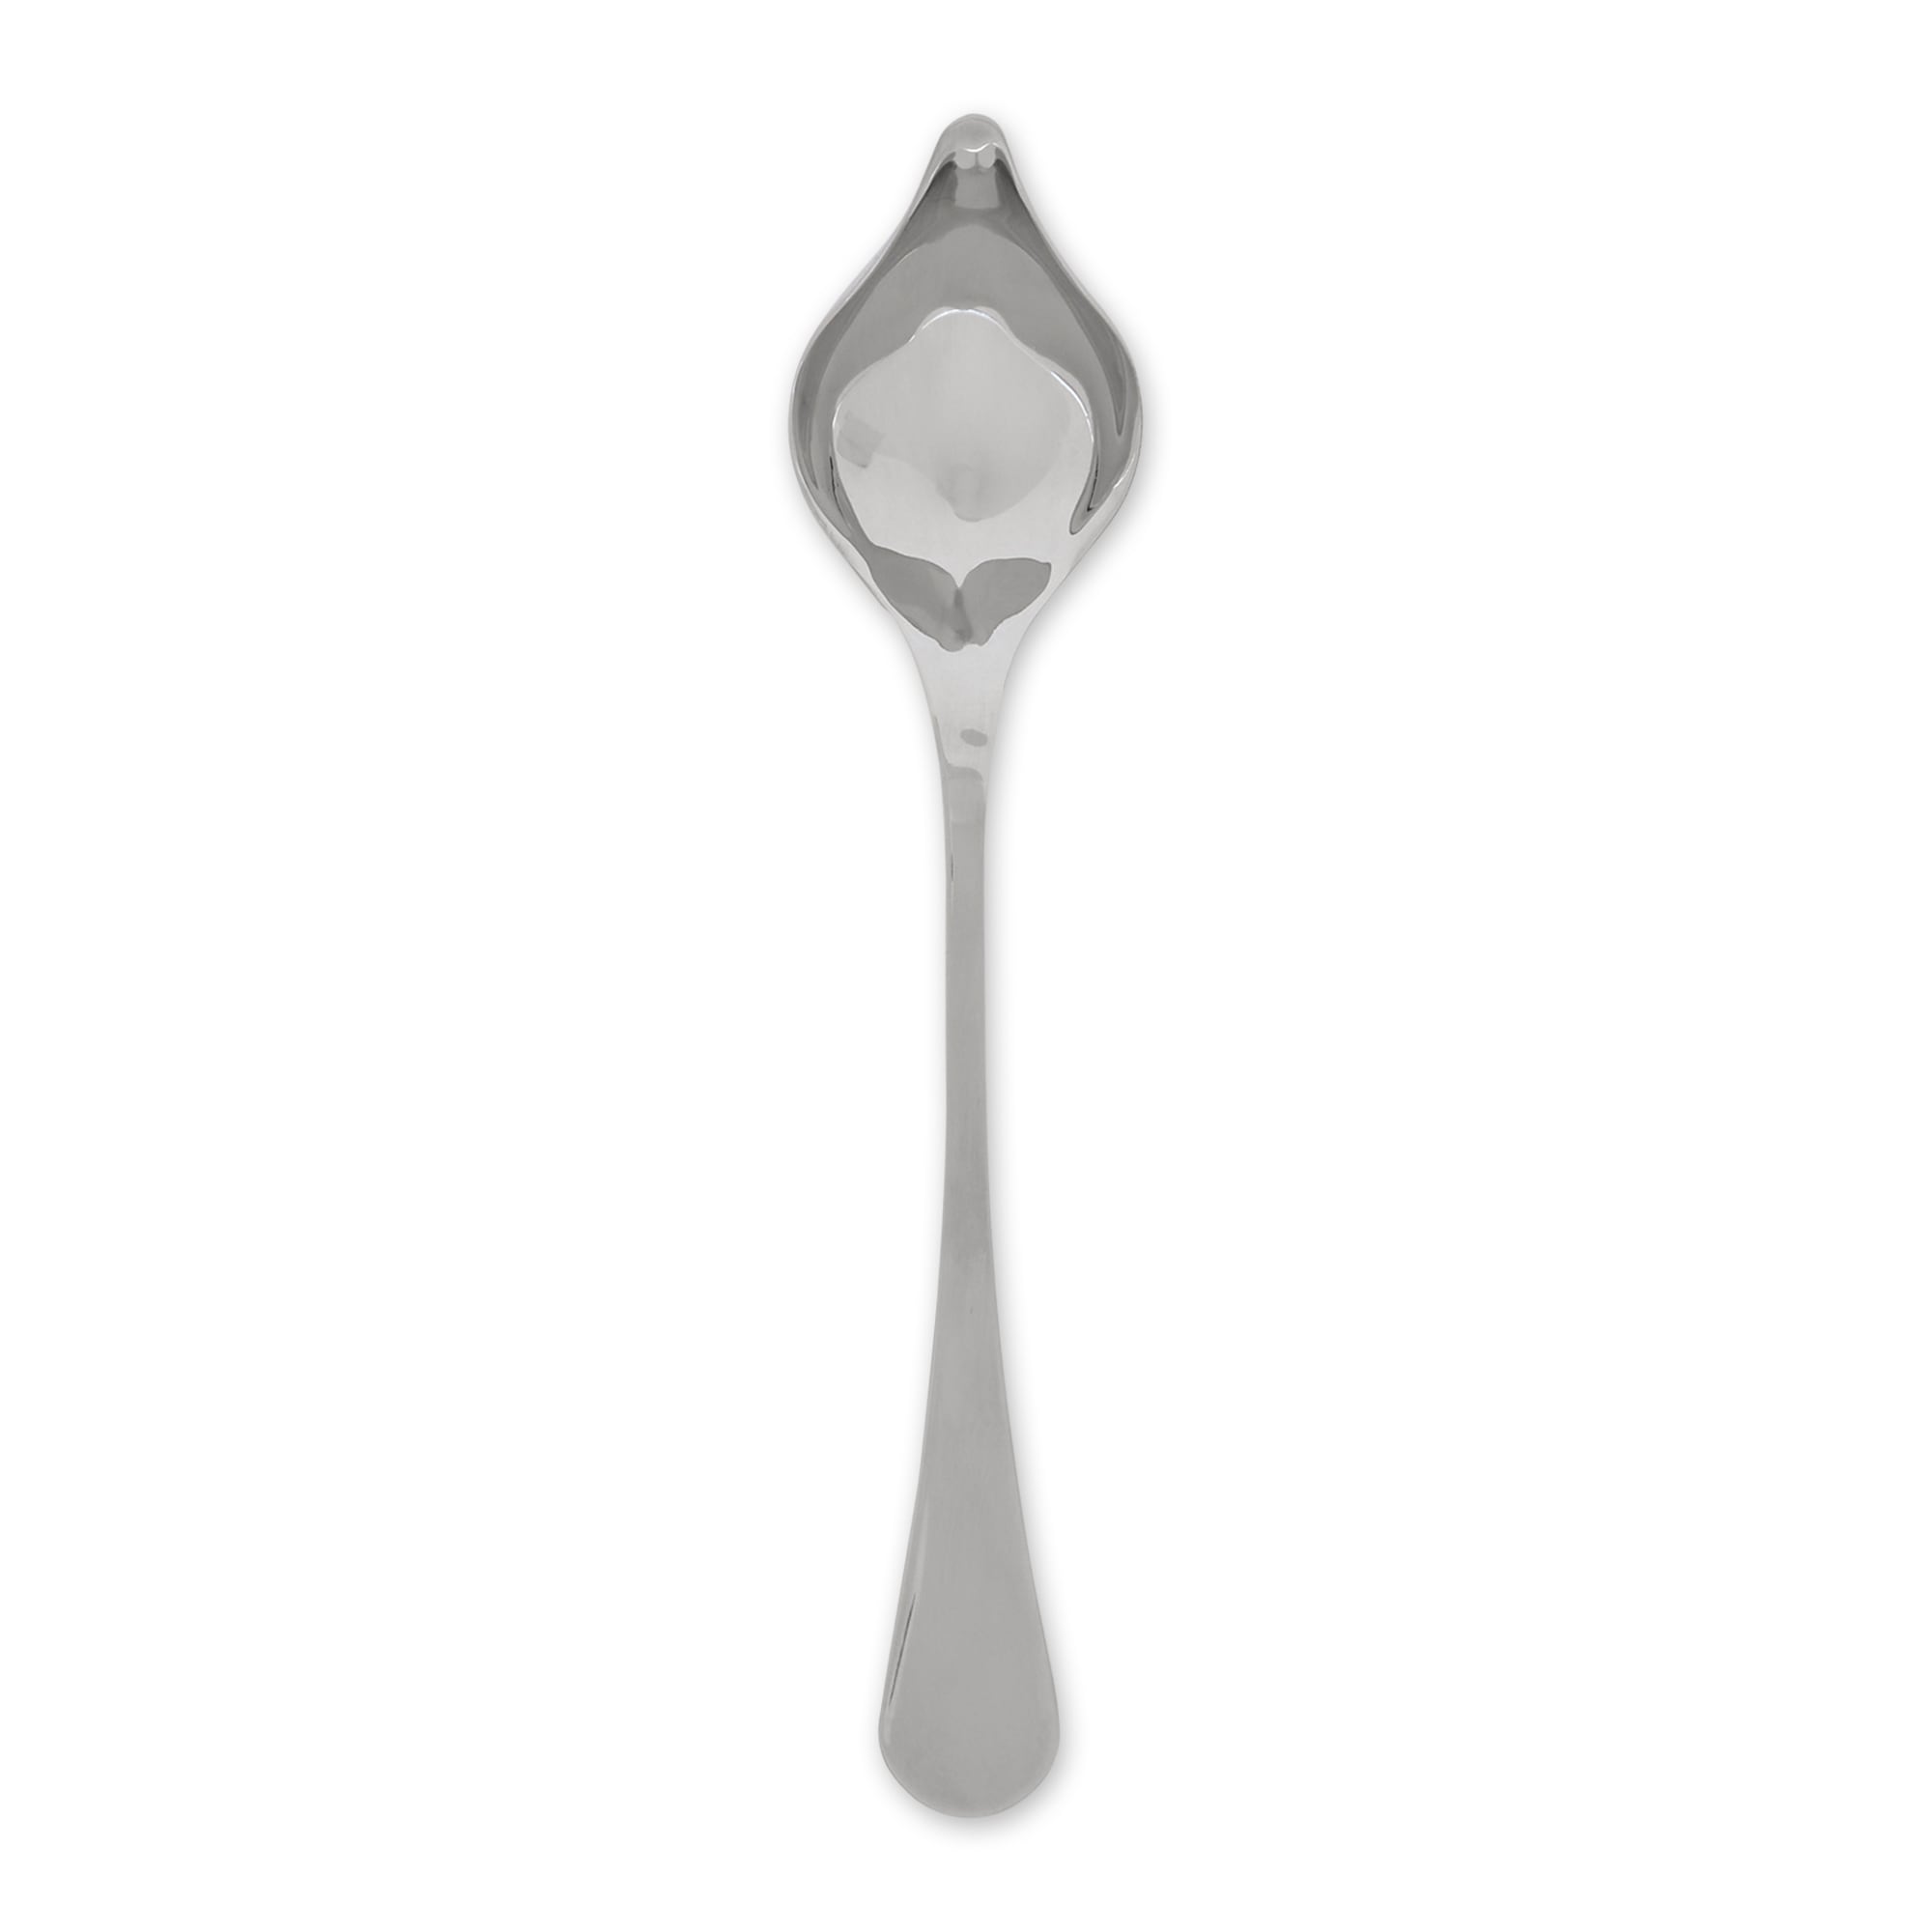 https://ak1.ostkcdn.com/images/products/is/images/direct/ae2a98369a4404c632a968d382ad8f0ce51da629/Stainless-Steel-Sauce-Spoon.jpg